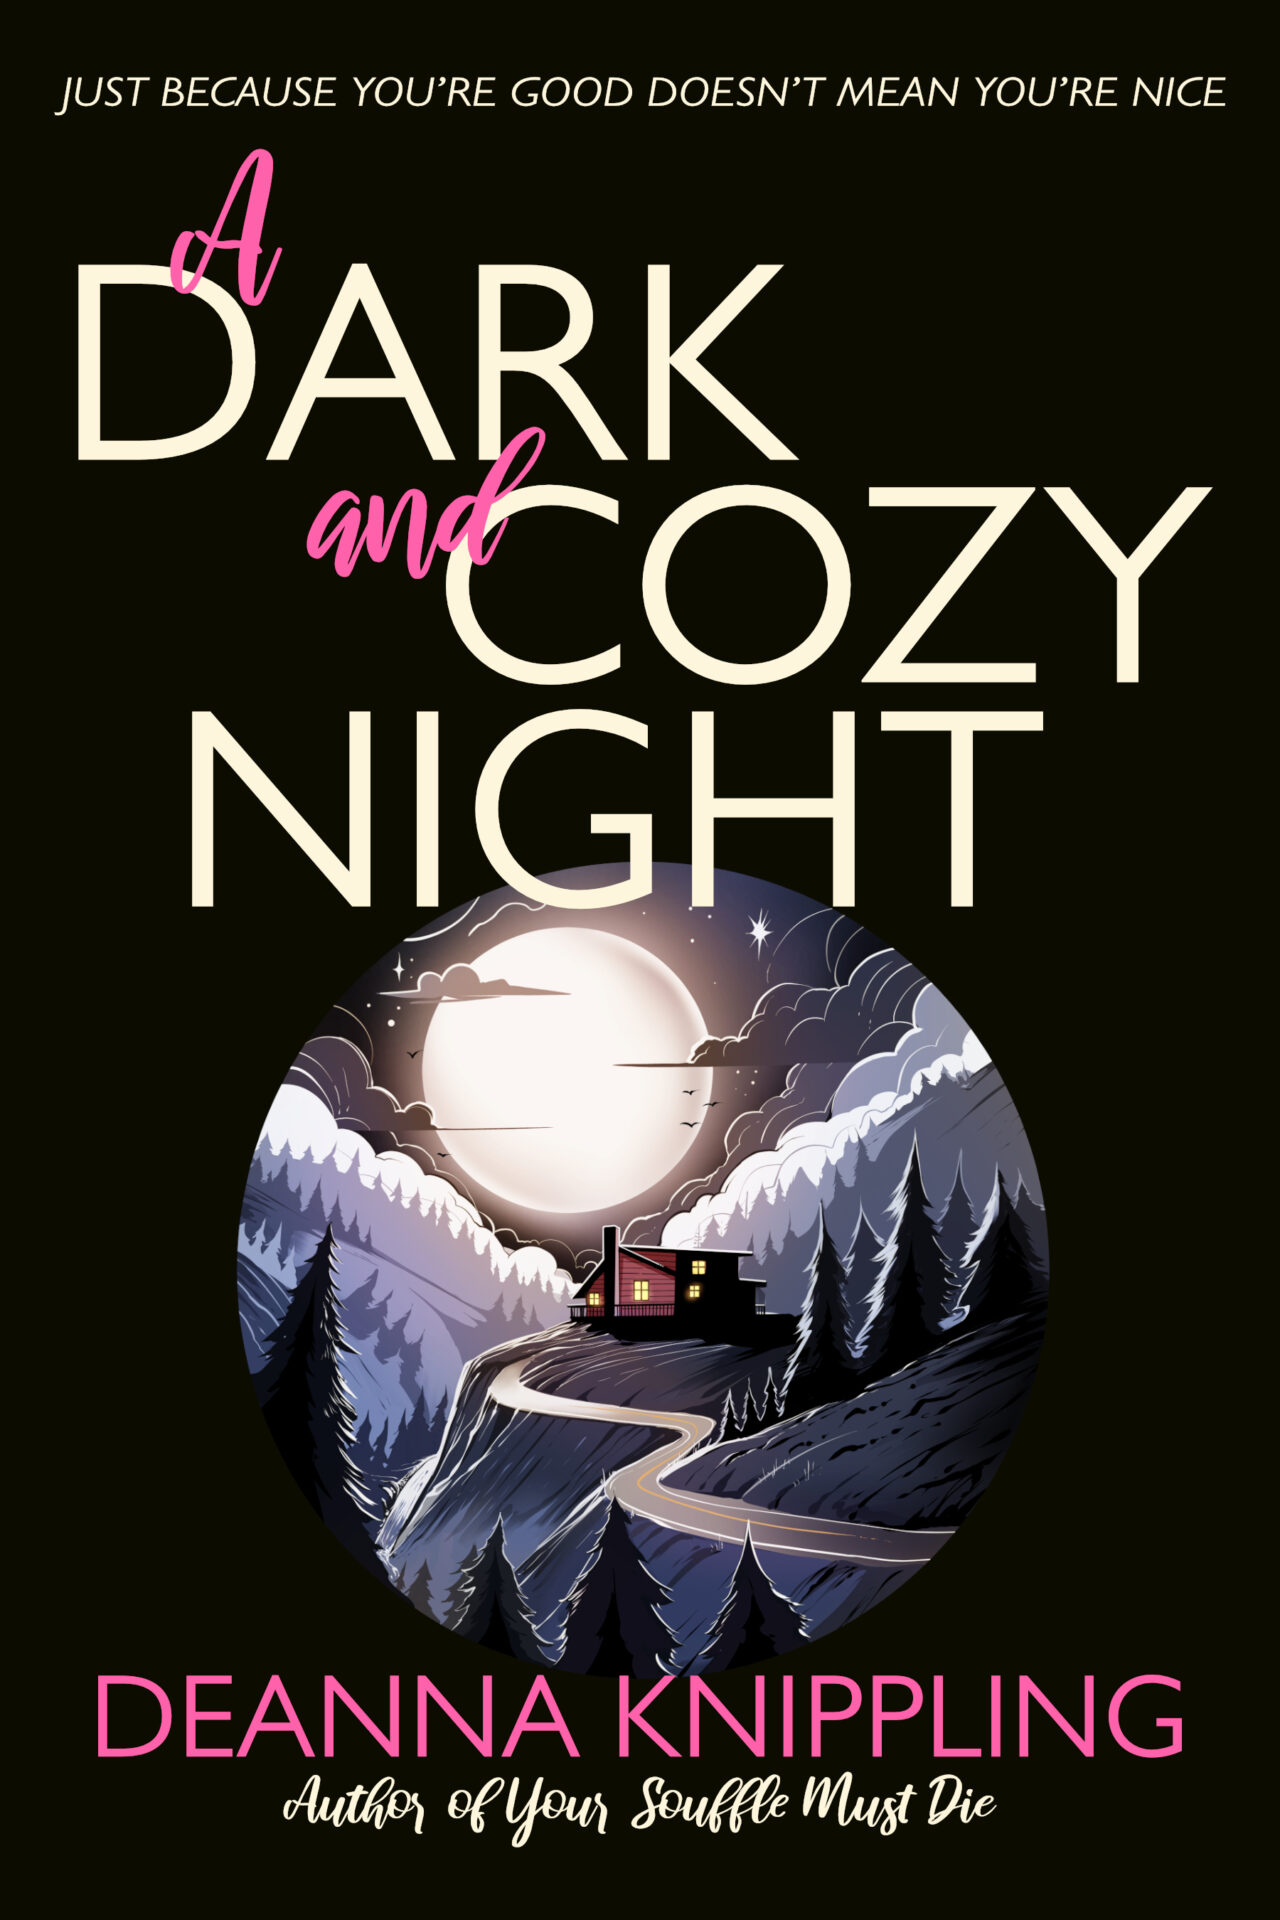 Cover of Dark and Cozy Night by author DeAnna Knippling, image of a winding mountain road and an isolated cabin